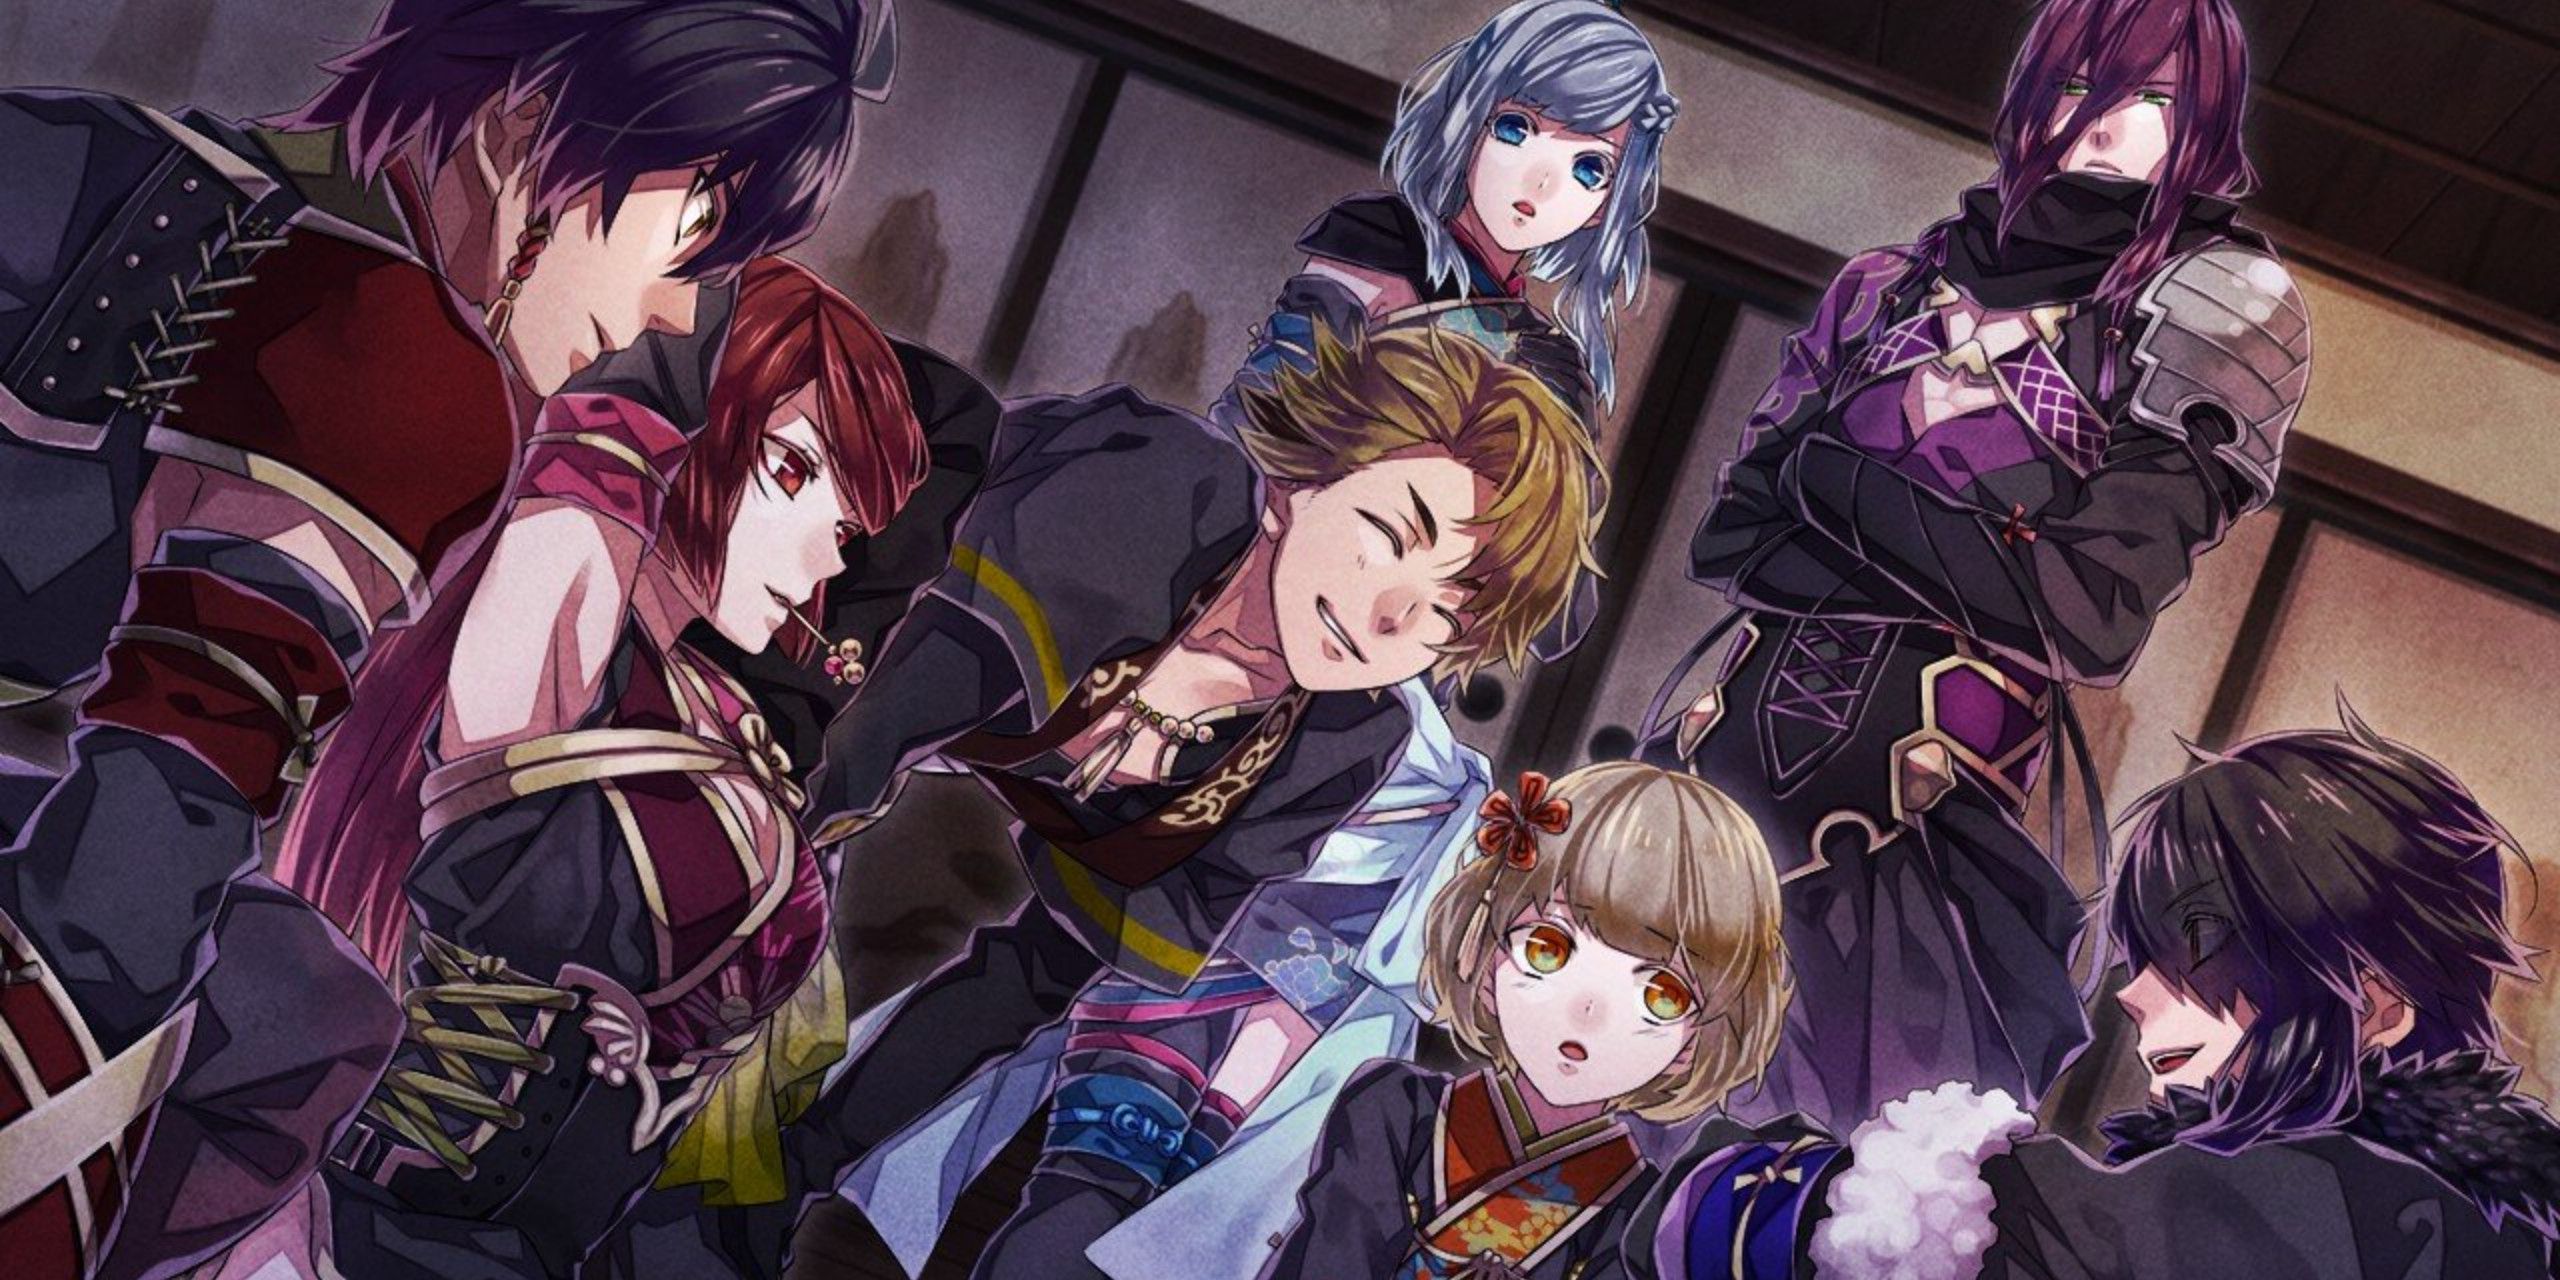 Otome game Nightshade with silver-haired main character Enju and her four love interests